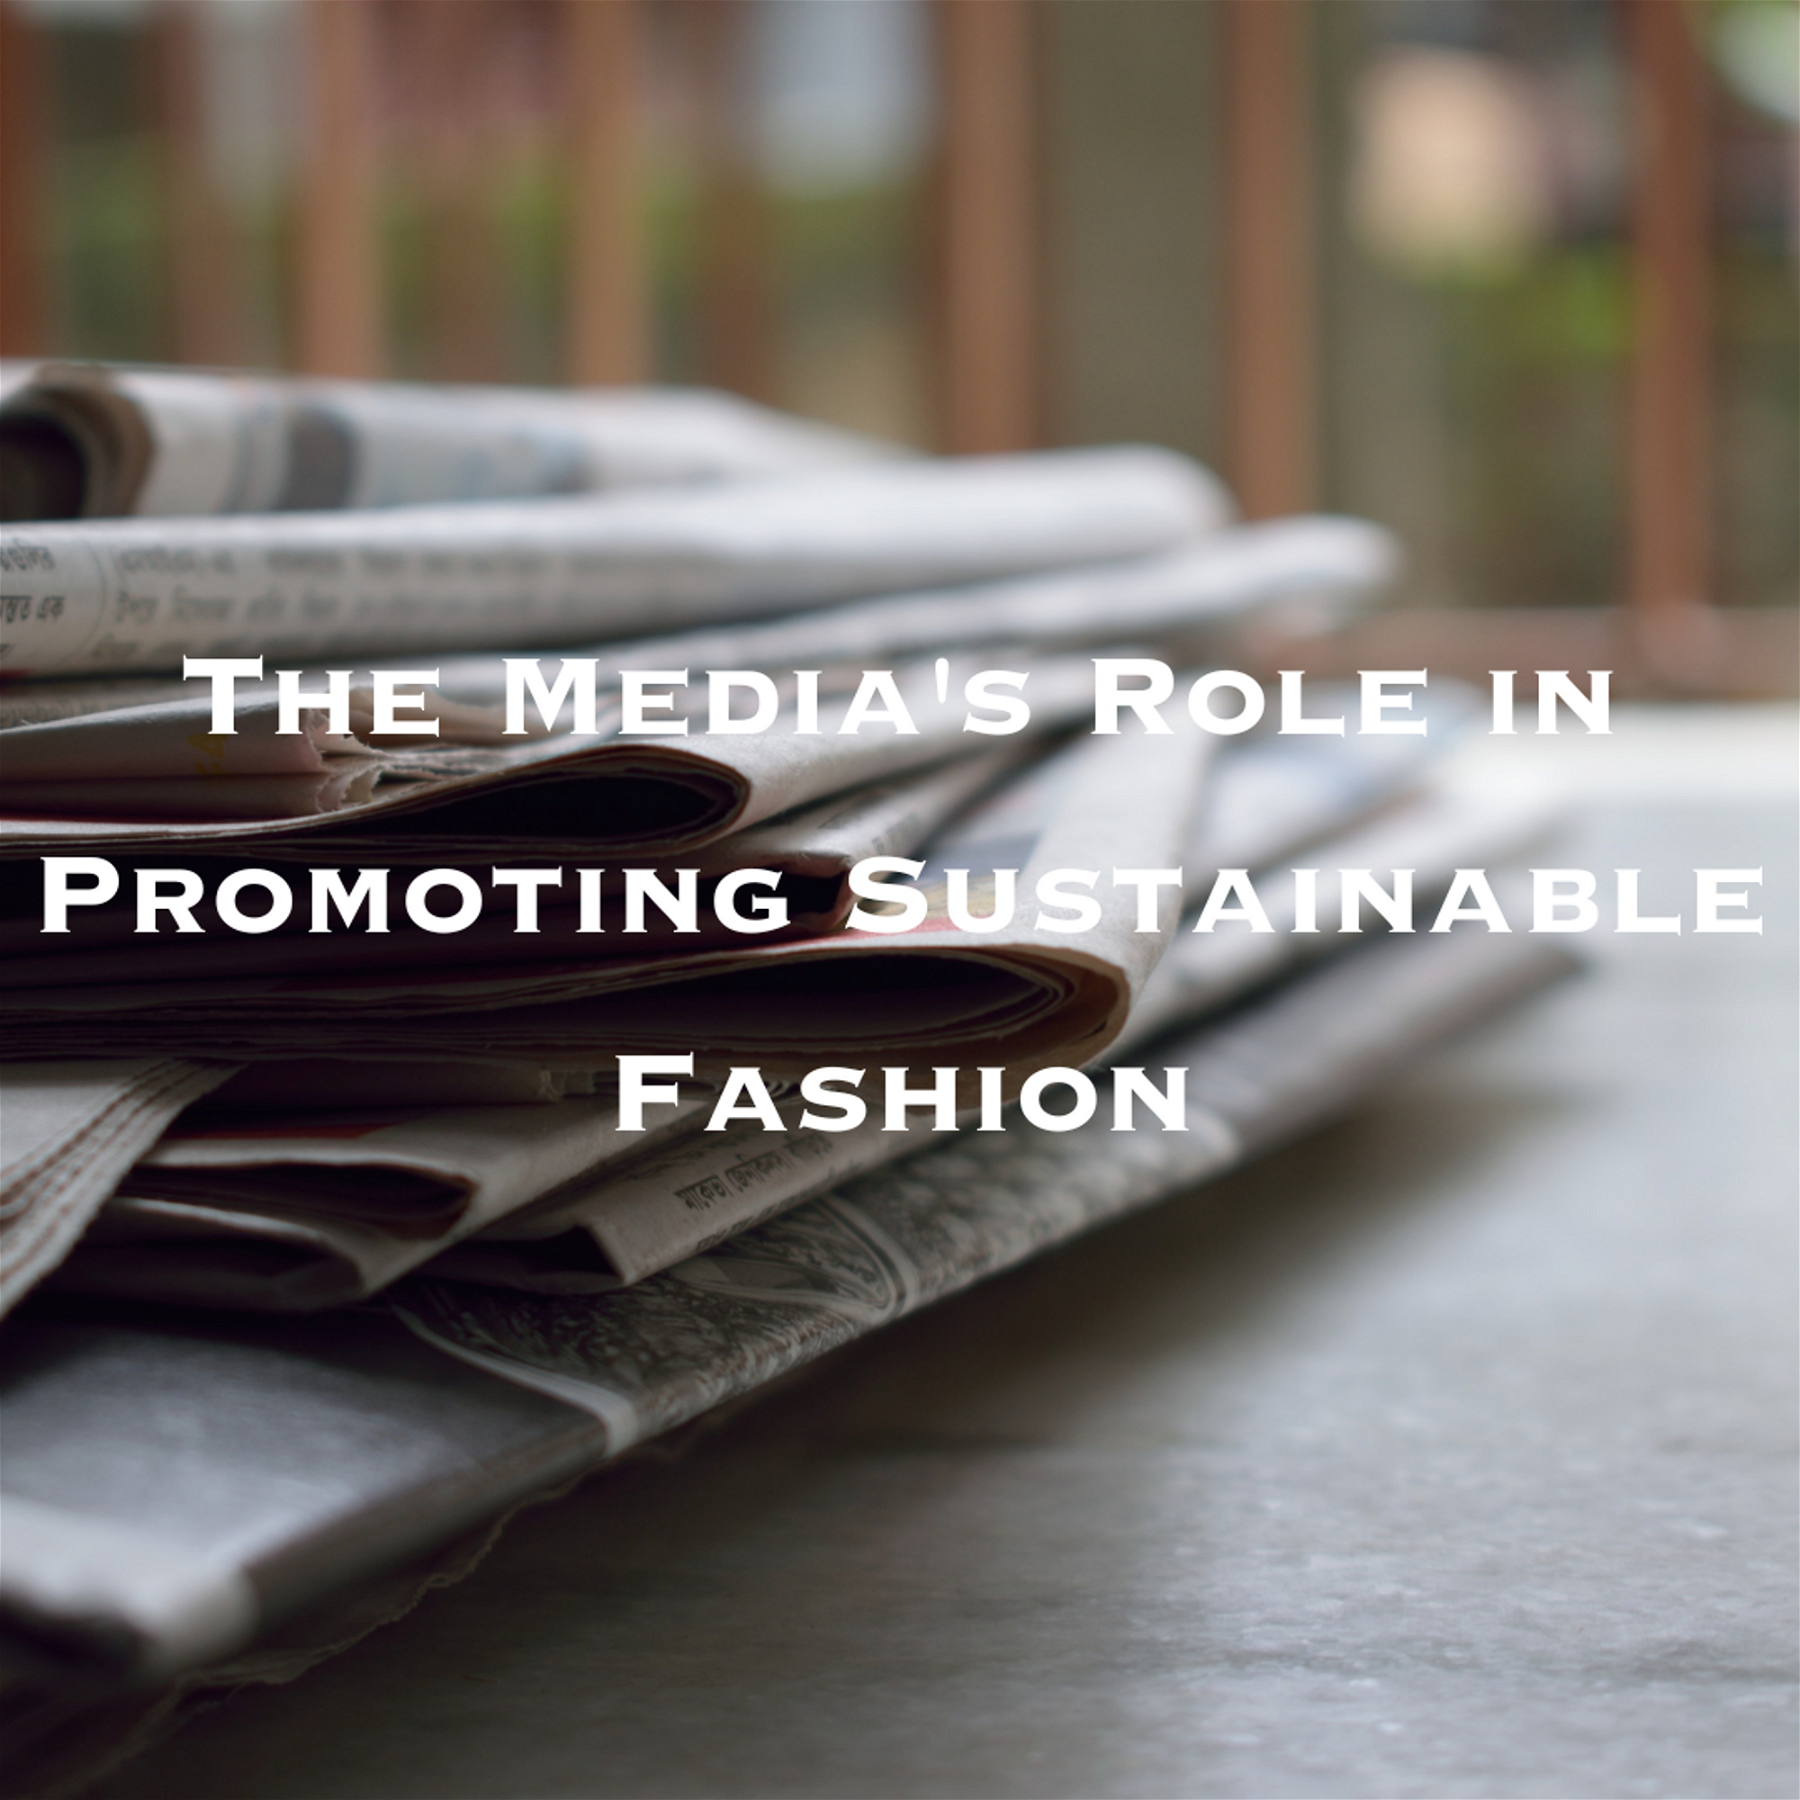 Fashioning Change: The Media's Role in Promoting Sustainable Fashion